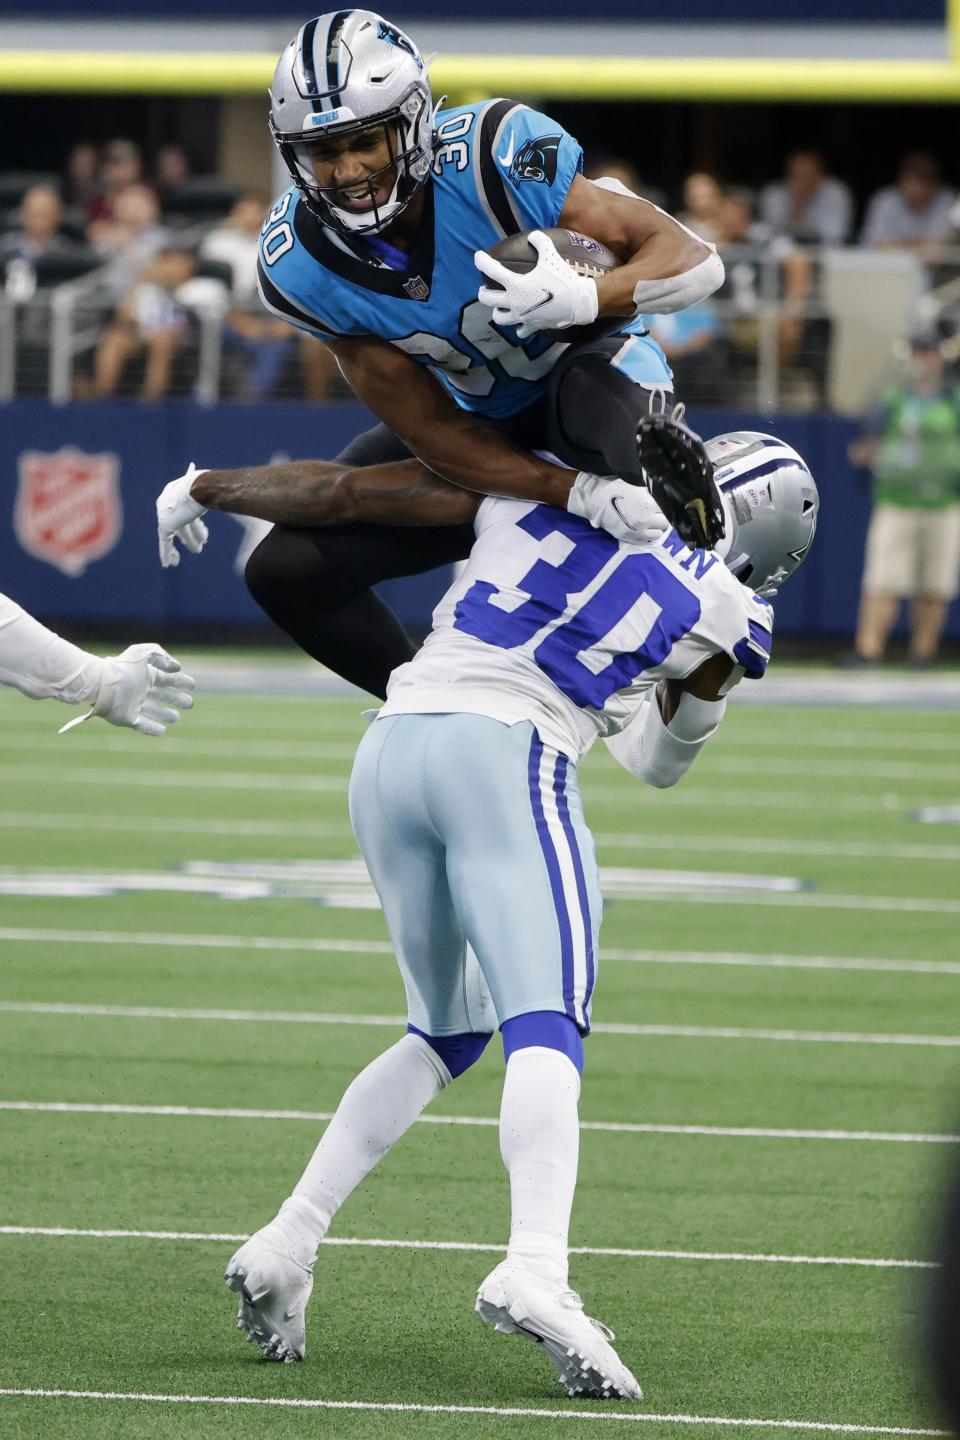 Carolina Panthers running back Chuba Hubbard (30) is tackled as as he attempts to leap past Dallas Cowboys cornerback Anthony Brown (30) in the first half of a NFL football game in Arlington, Texas, Sunday, Oct. 3, 2021. (AP Photo/Michael Ainsworth)